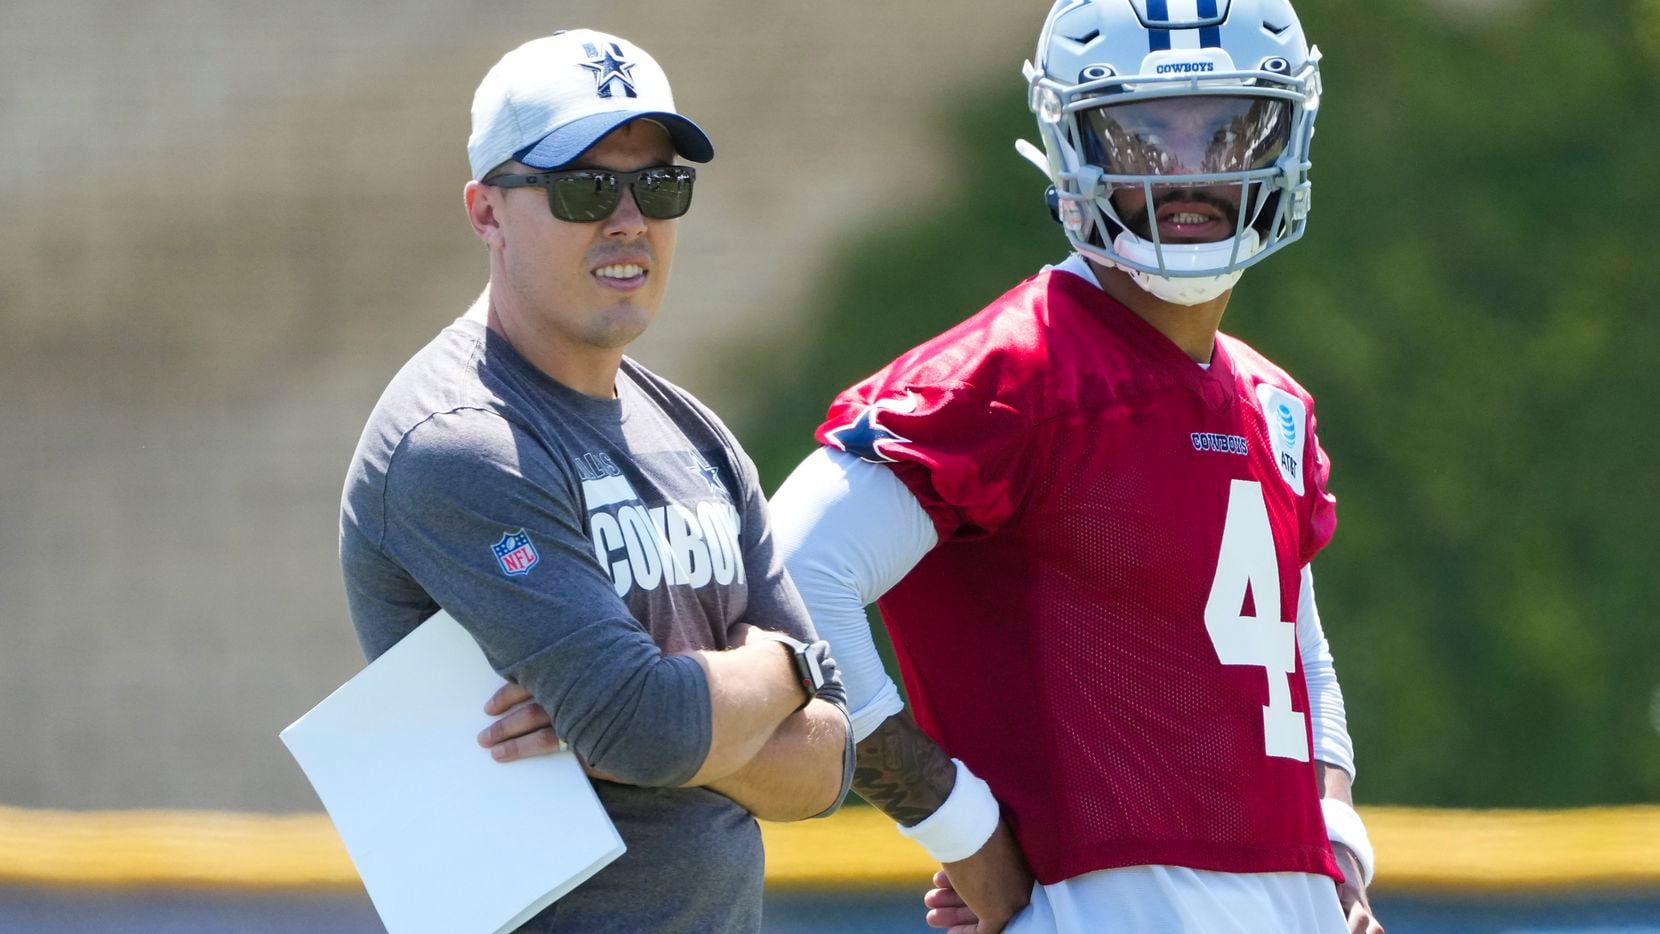 Dallas Cowboys quarterback Dak Prescott (4) talks with offensive coordinator Kellen Moore during the first practice of the team’s training camp on Thursday, July 22, 2021, in Oxnard, Calif.